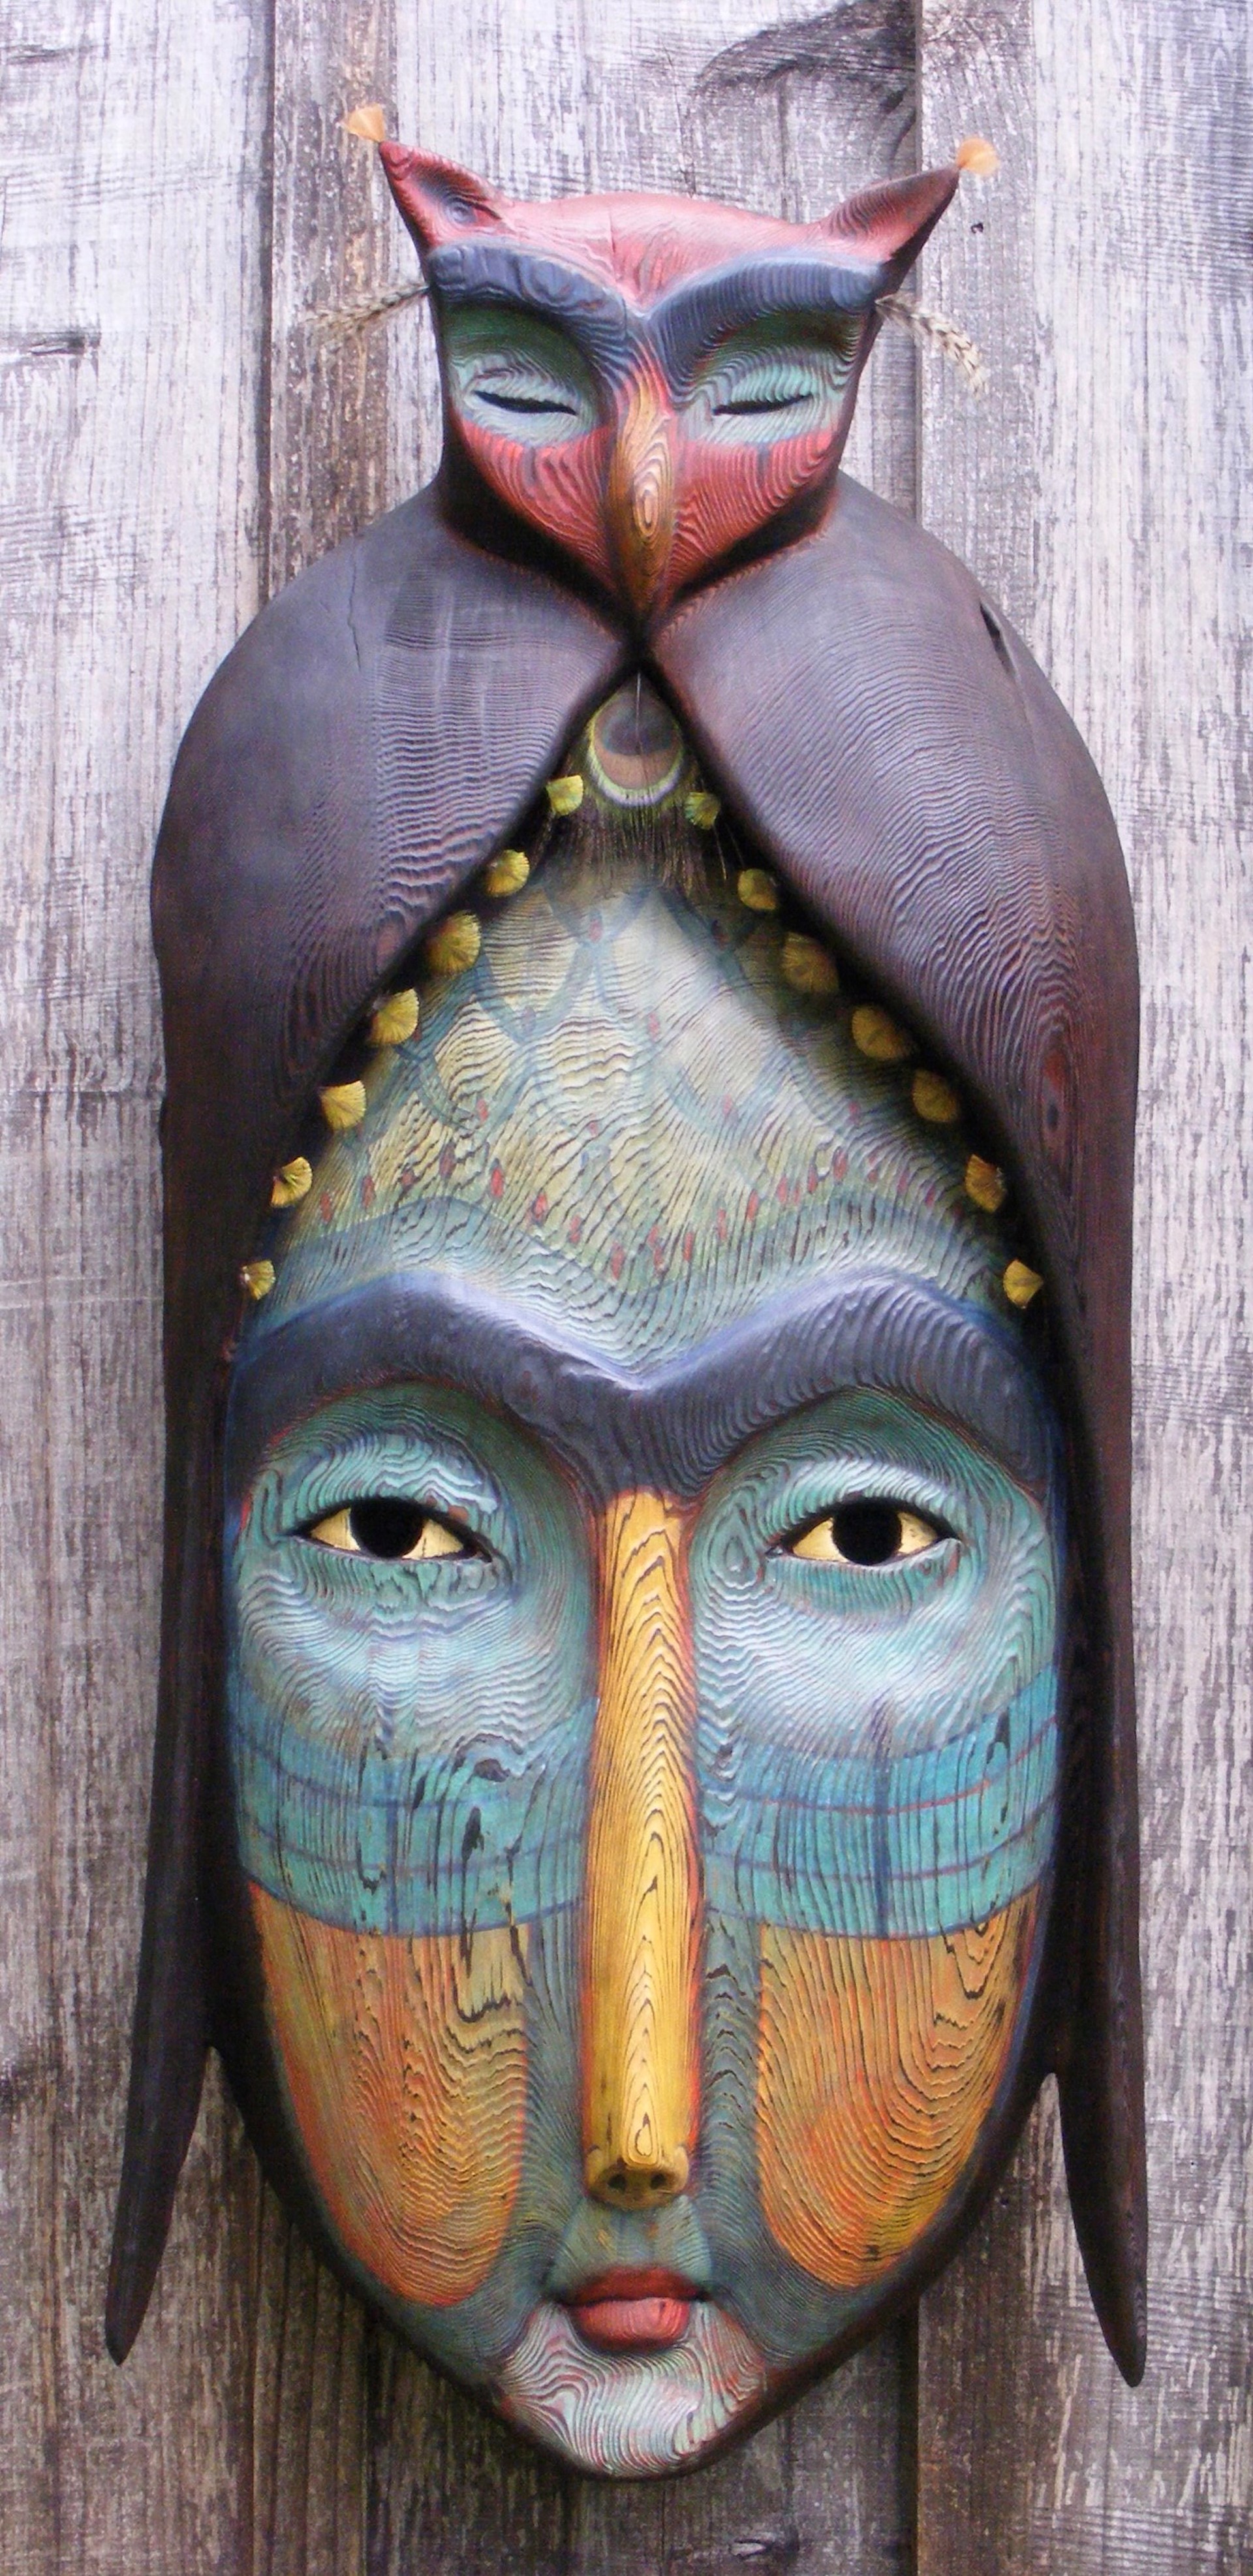 Guardian Owl Mask by Robin and John Gumaelius